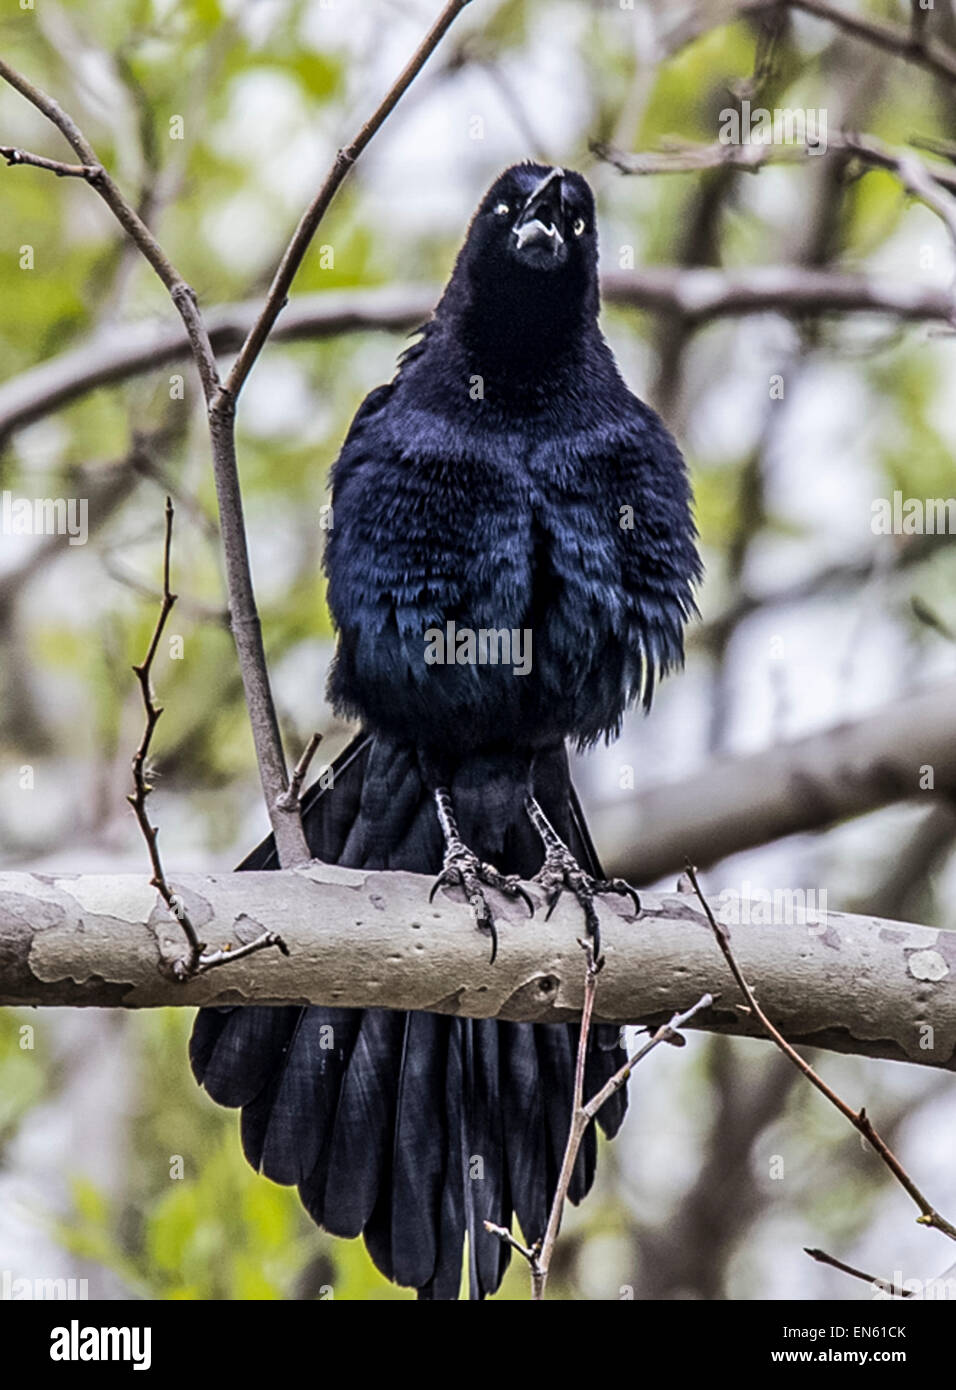 GREAT-TAILED GRACKLE (Quiscalus mexicanus) singing during mating season. Stock Photo